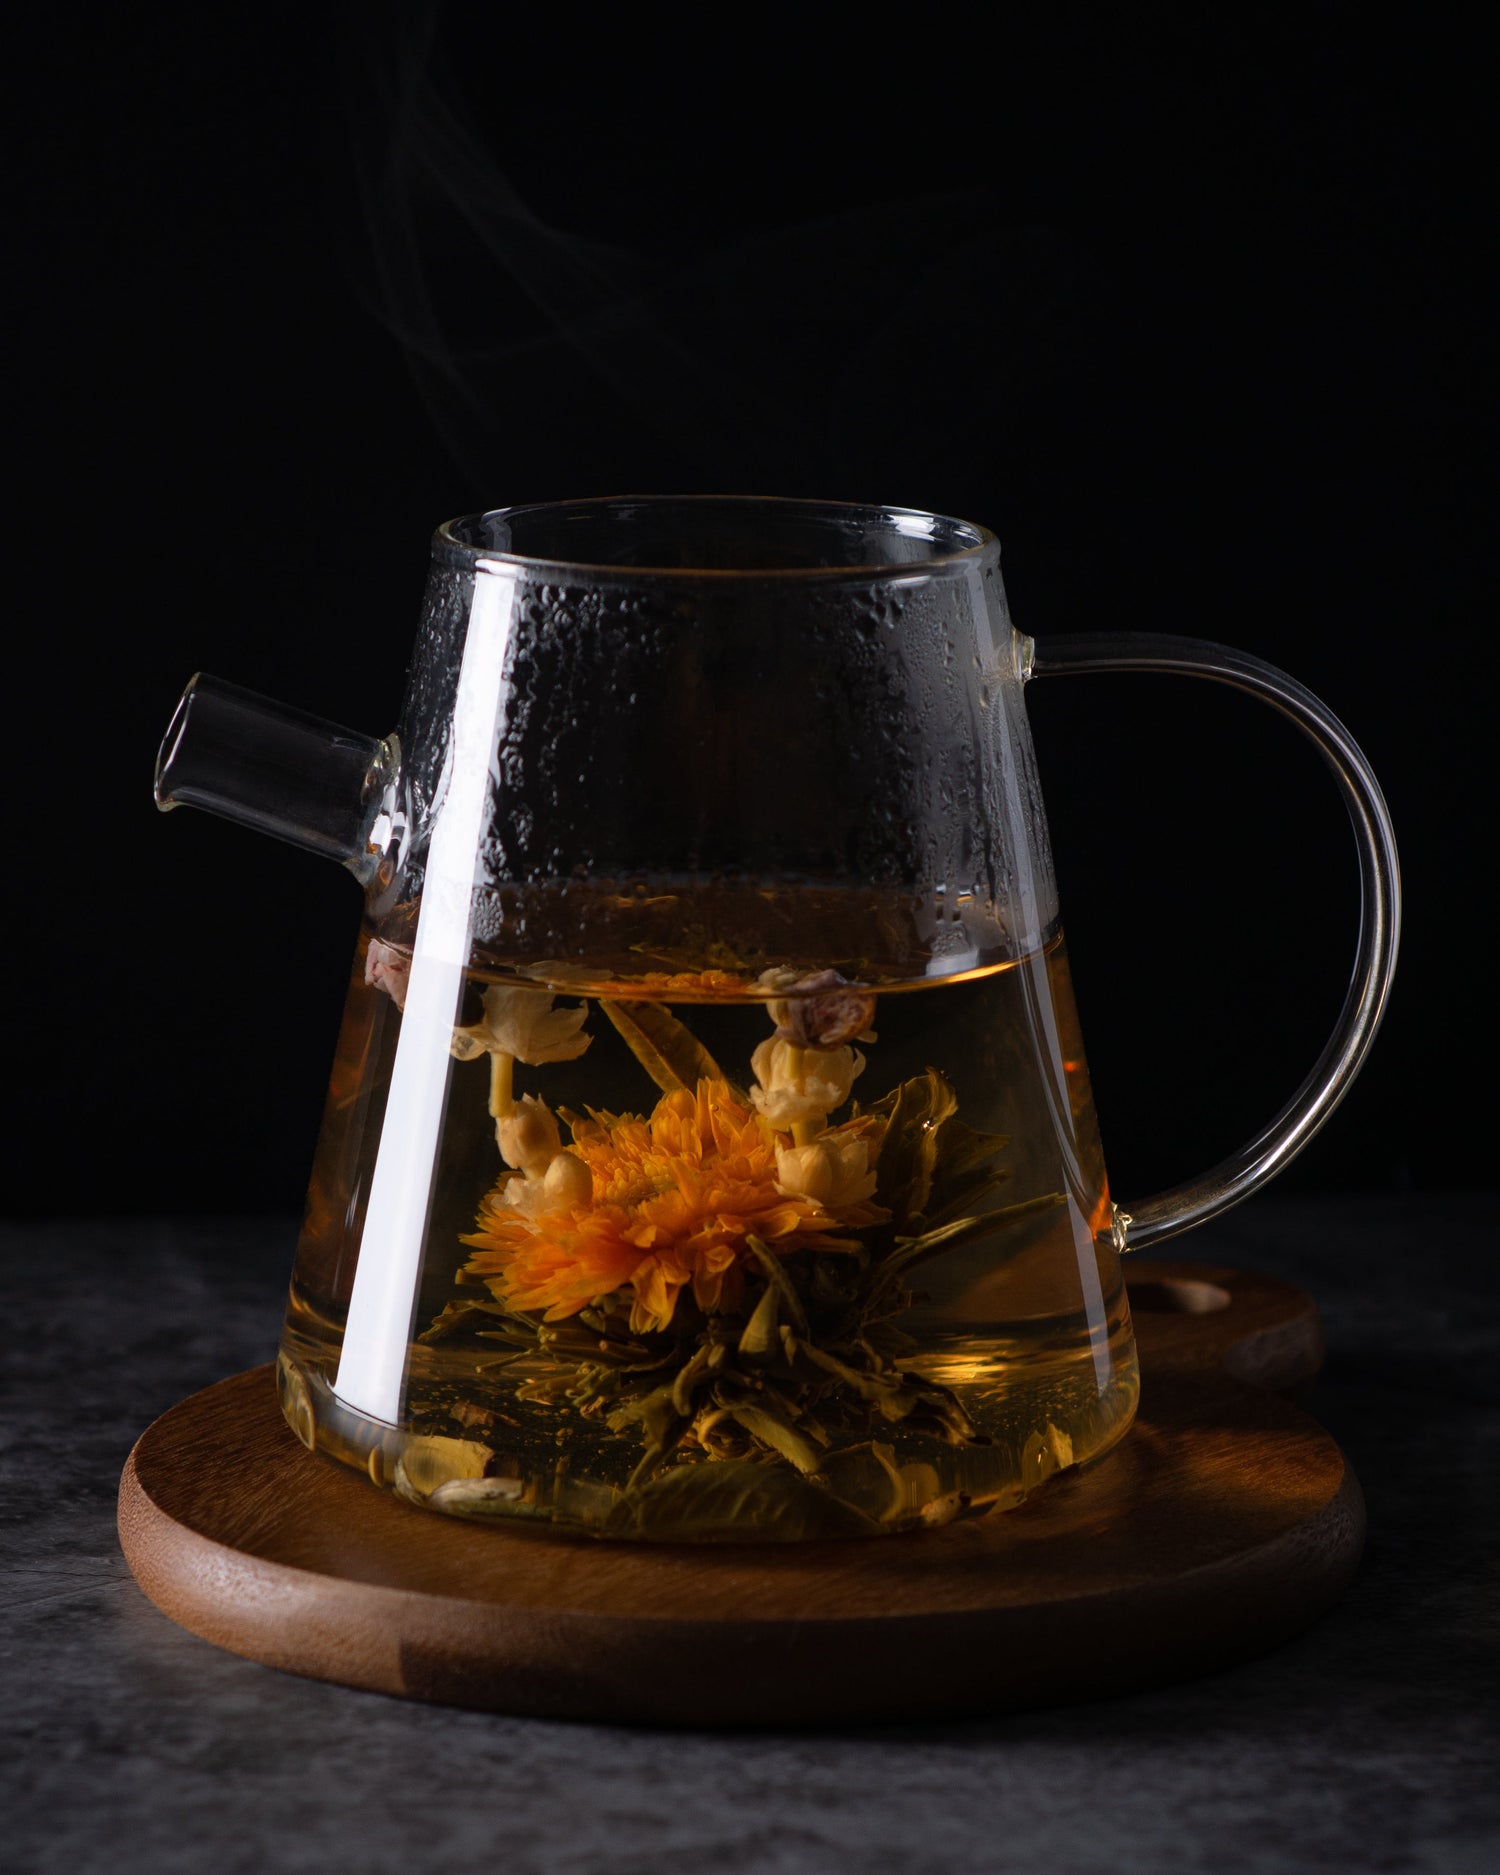 "Tea is a gentle reminder to slow down and savor the moment."